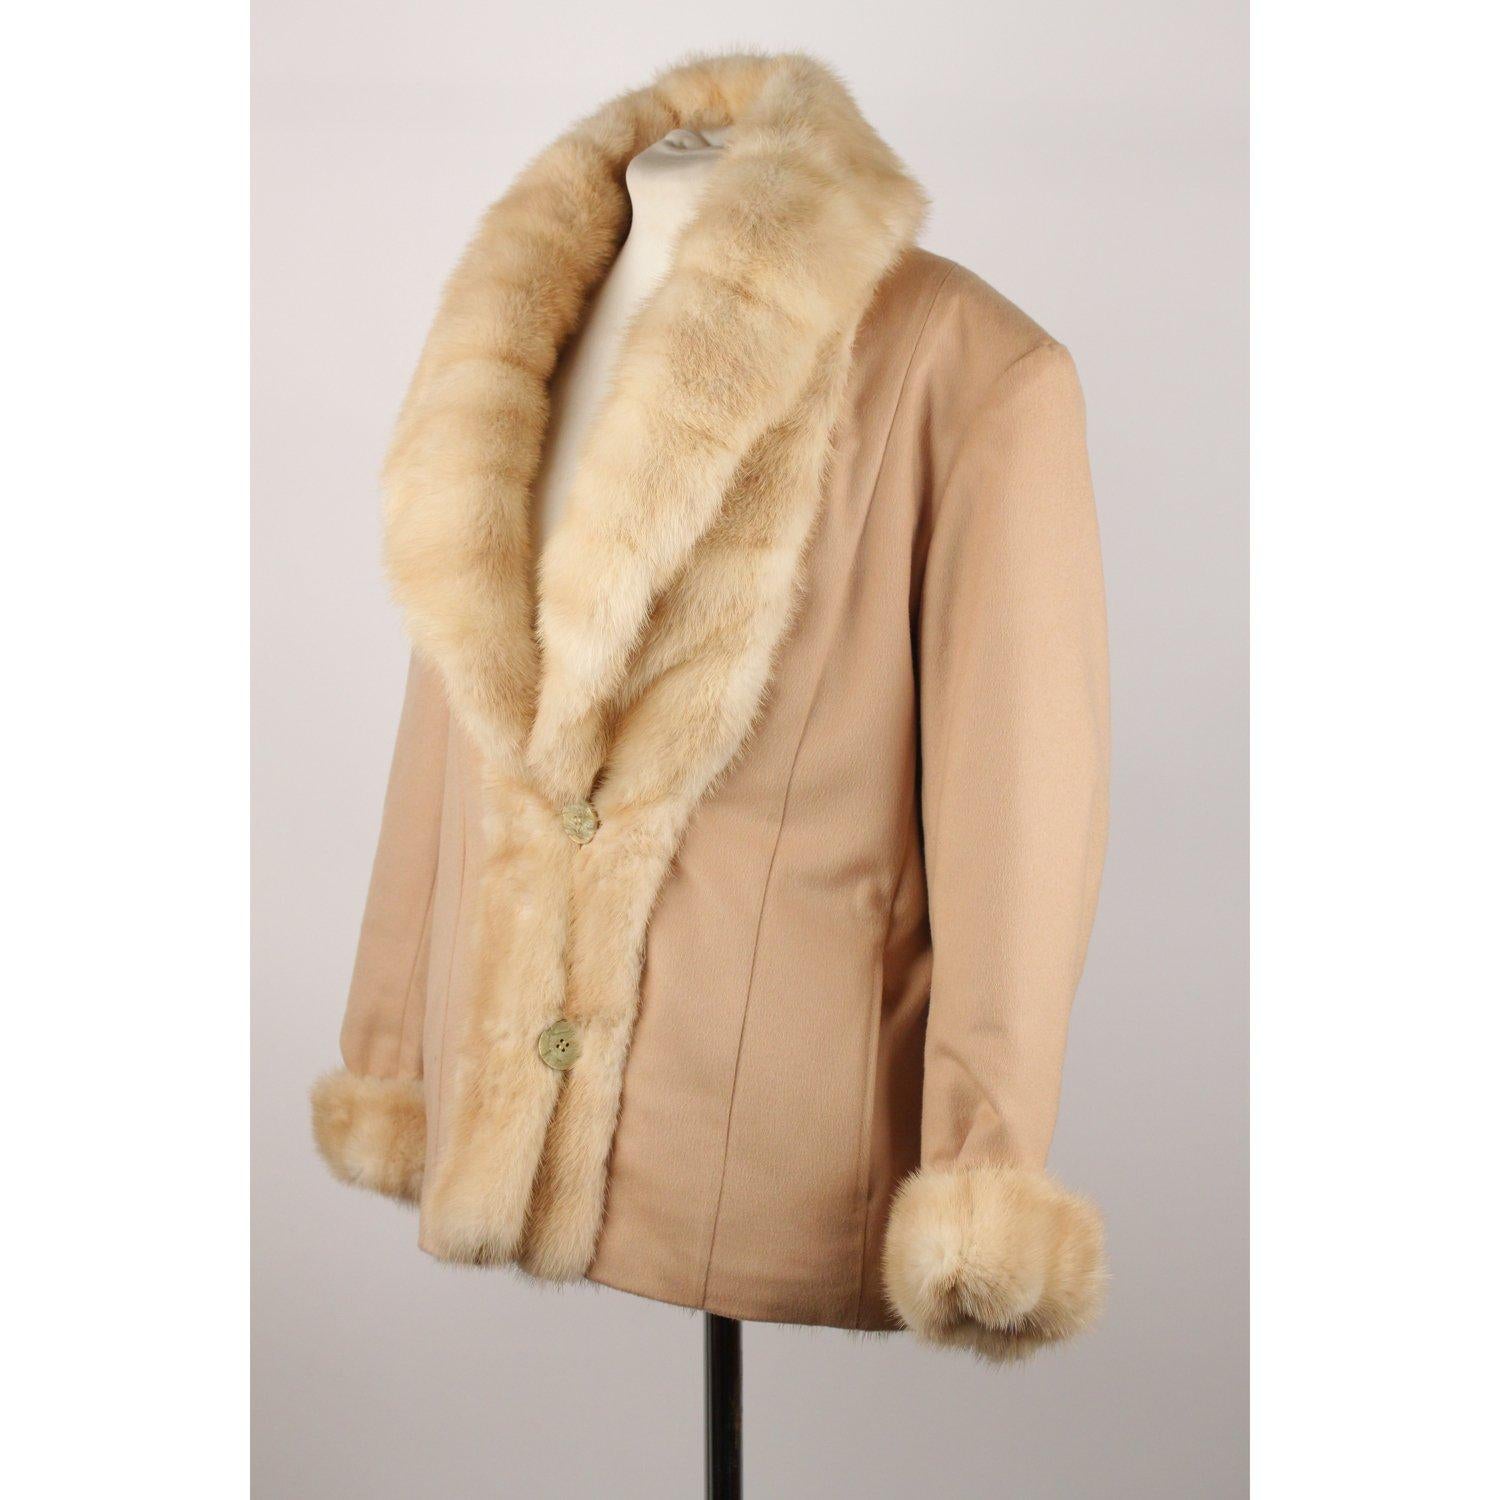  Reversible Jacket with Mink Fur Lining 2